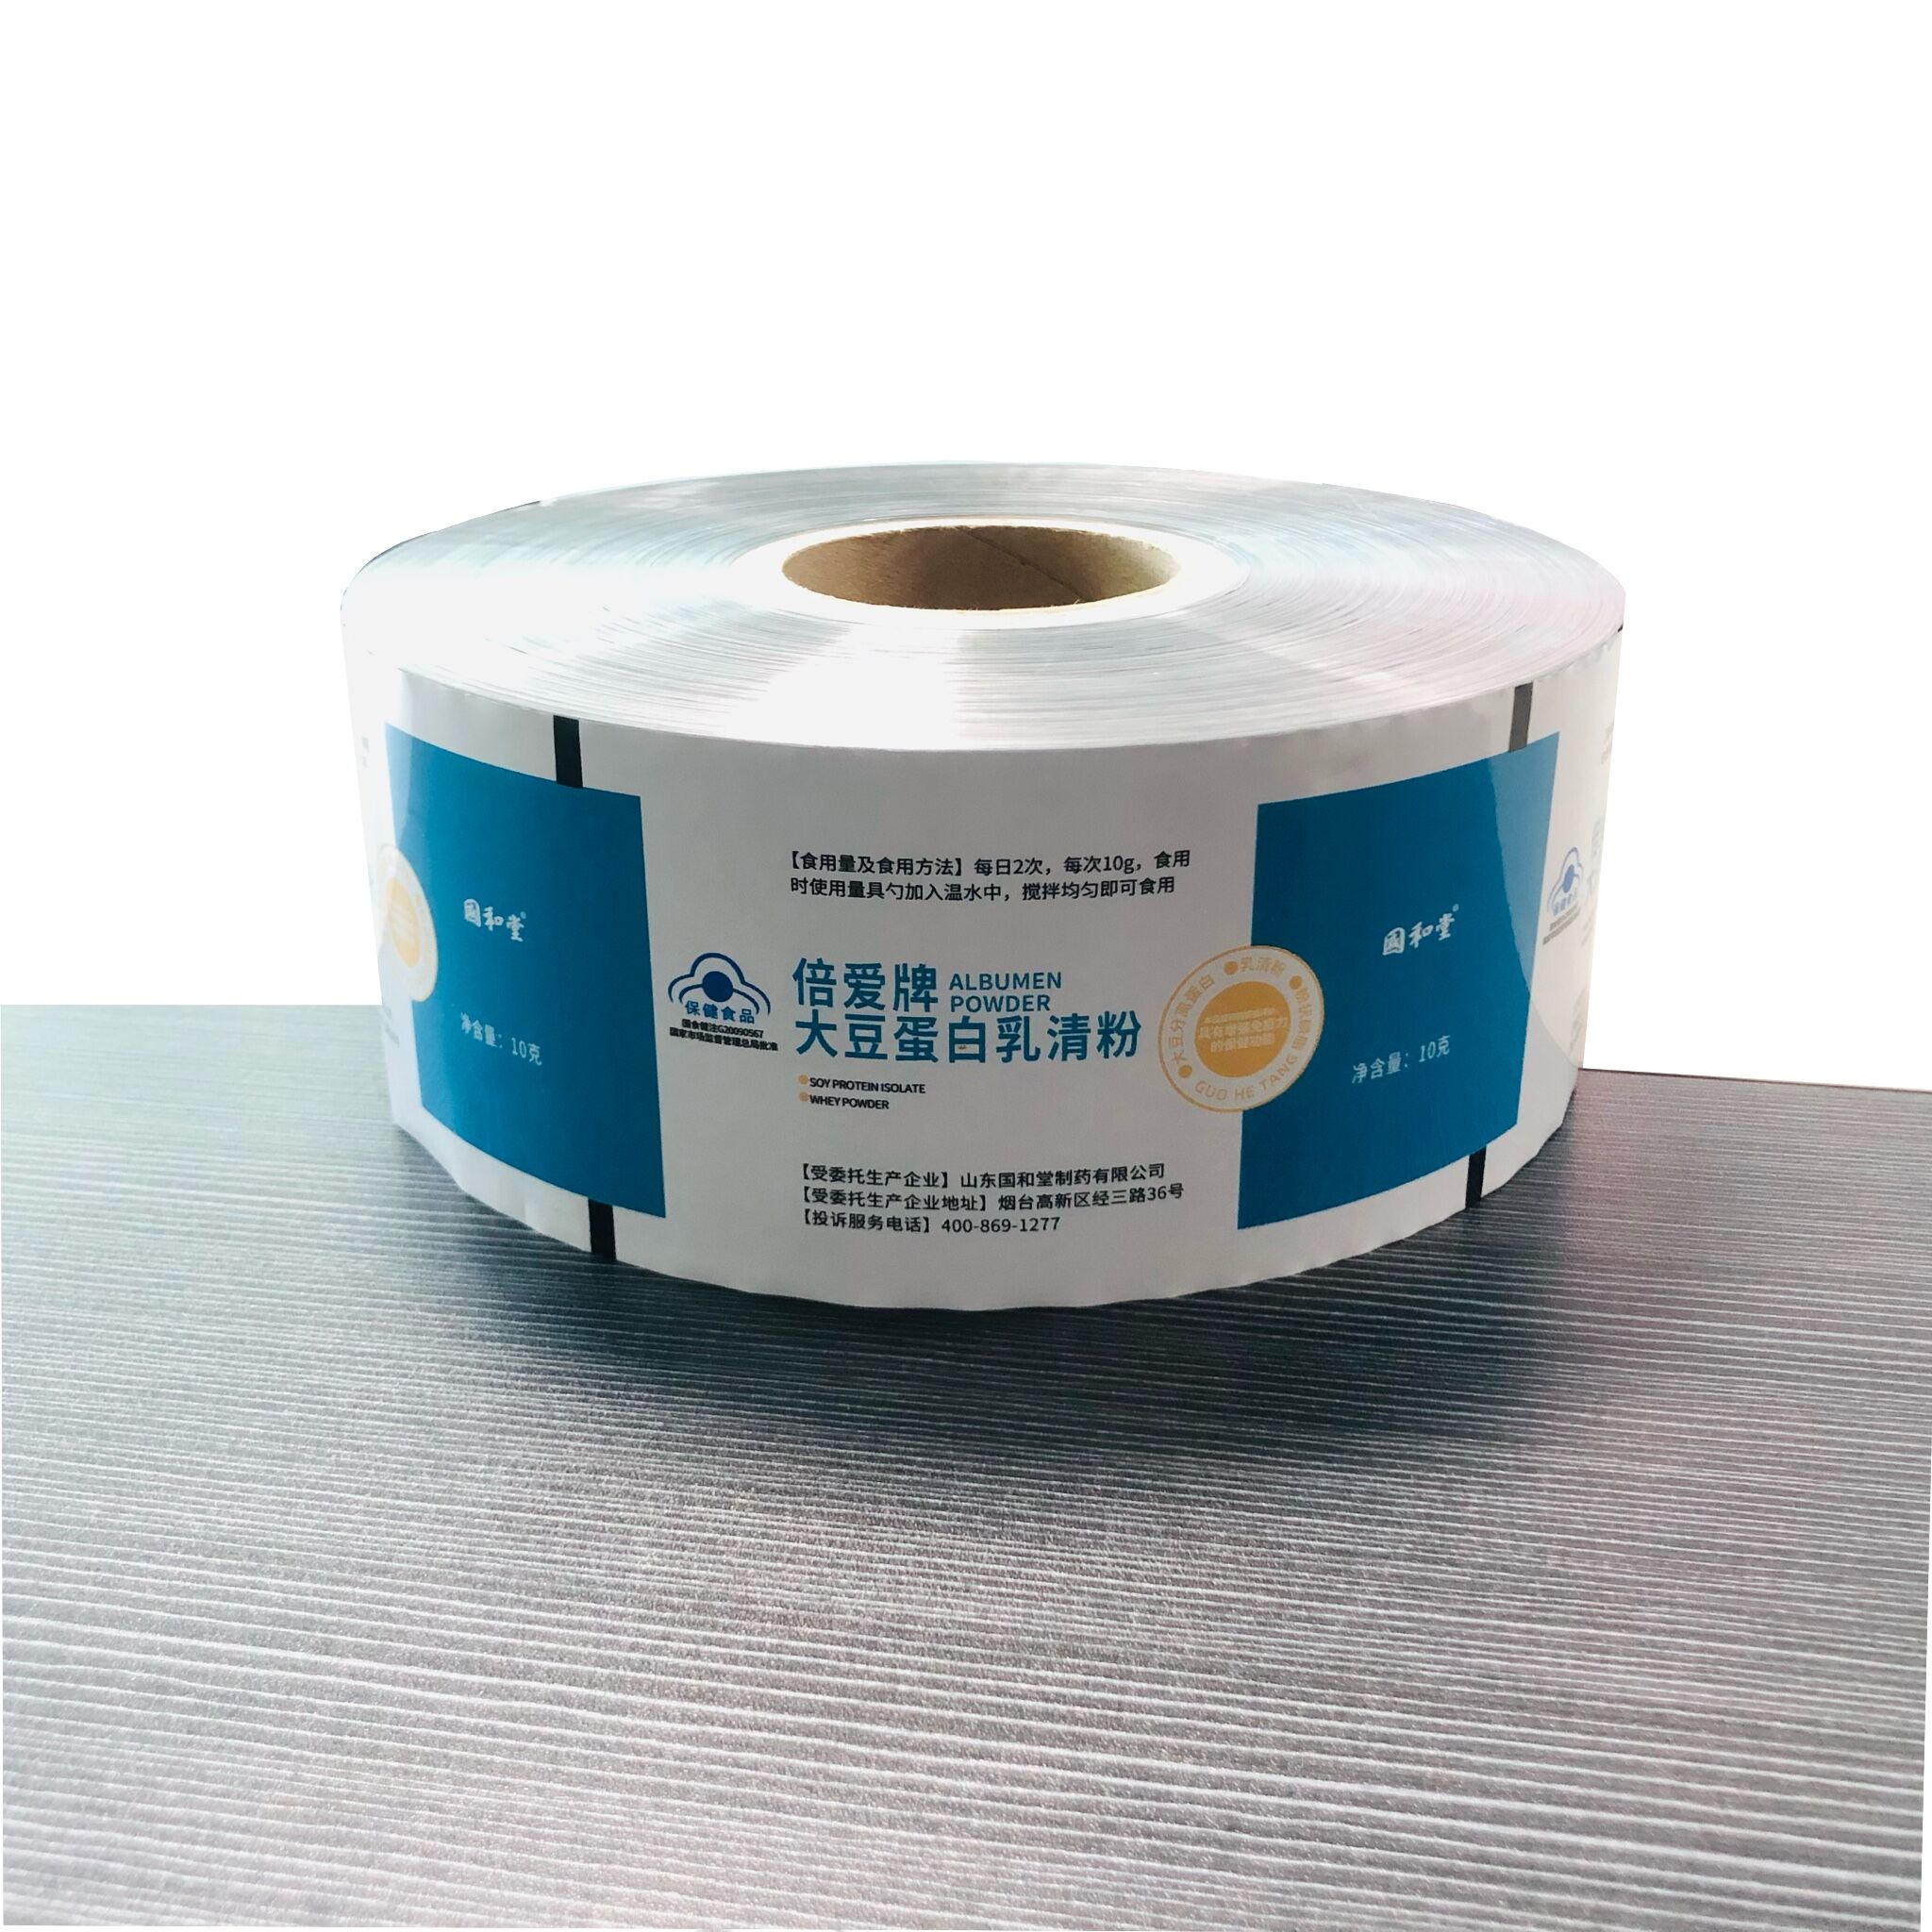 Powder Product Packaging Composite Film Roll